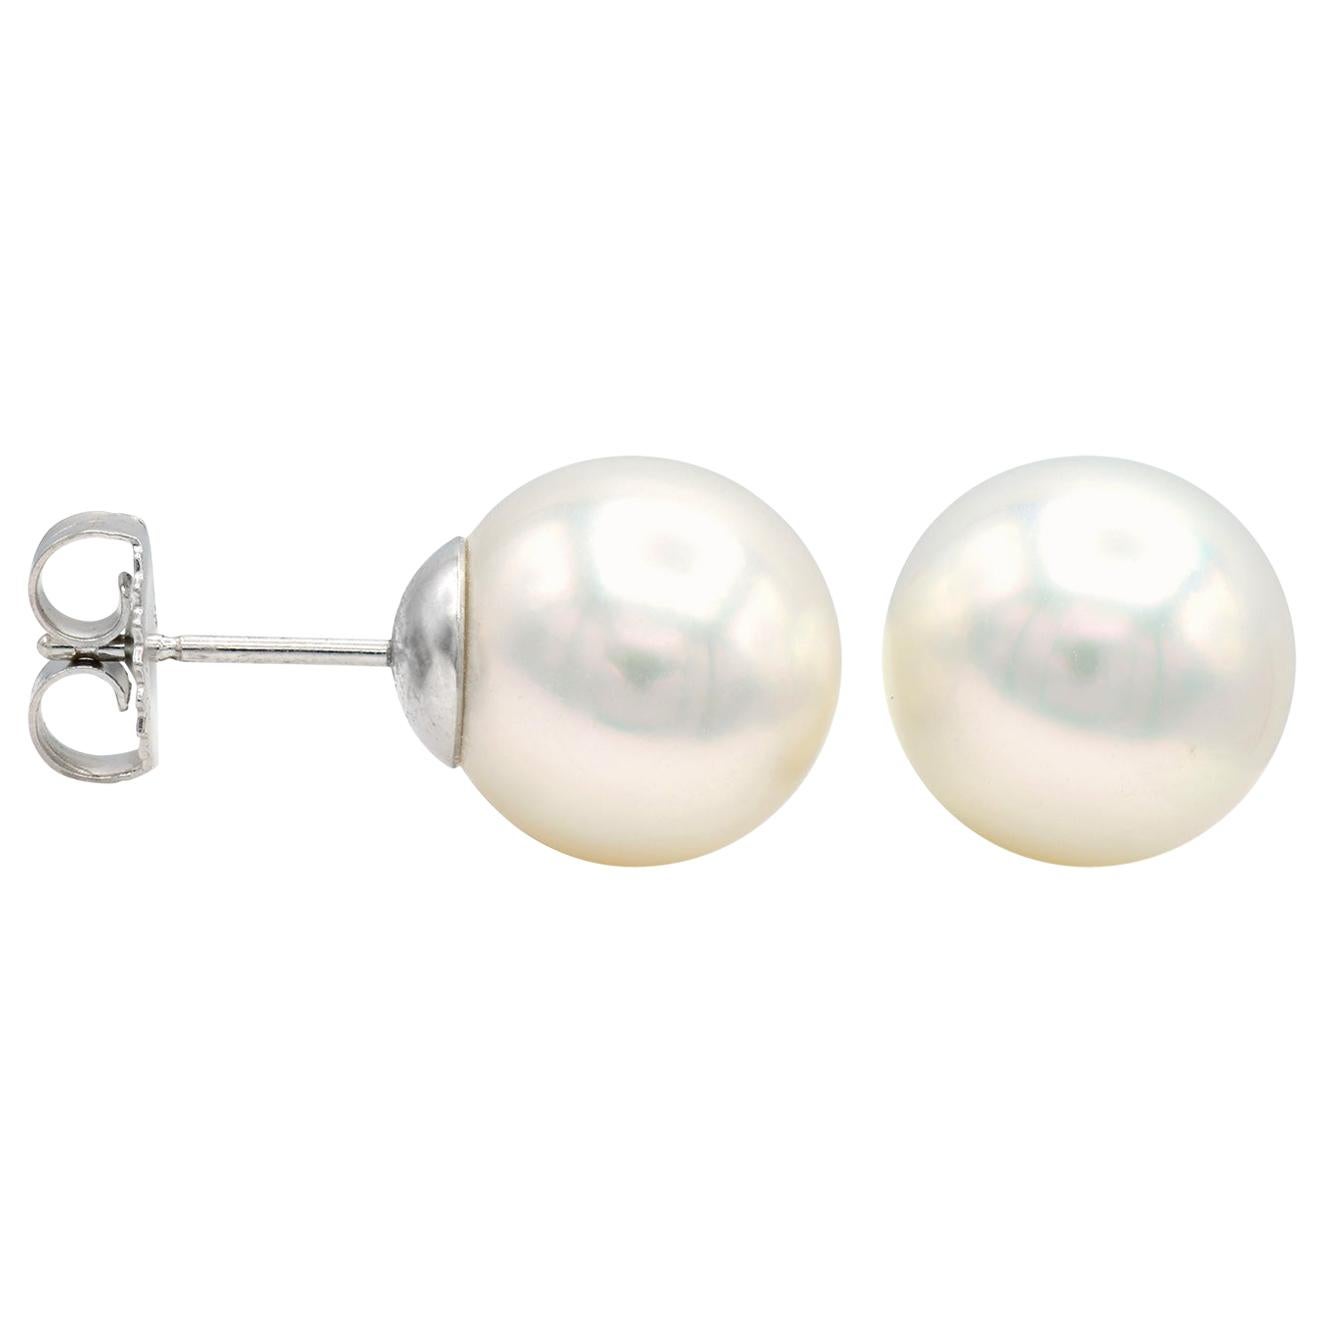 12-12.5mm South Sea Pearl Stud Earrings with 14 Karat White Gold Posts and Backs